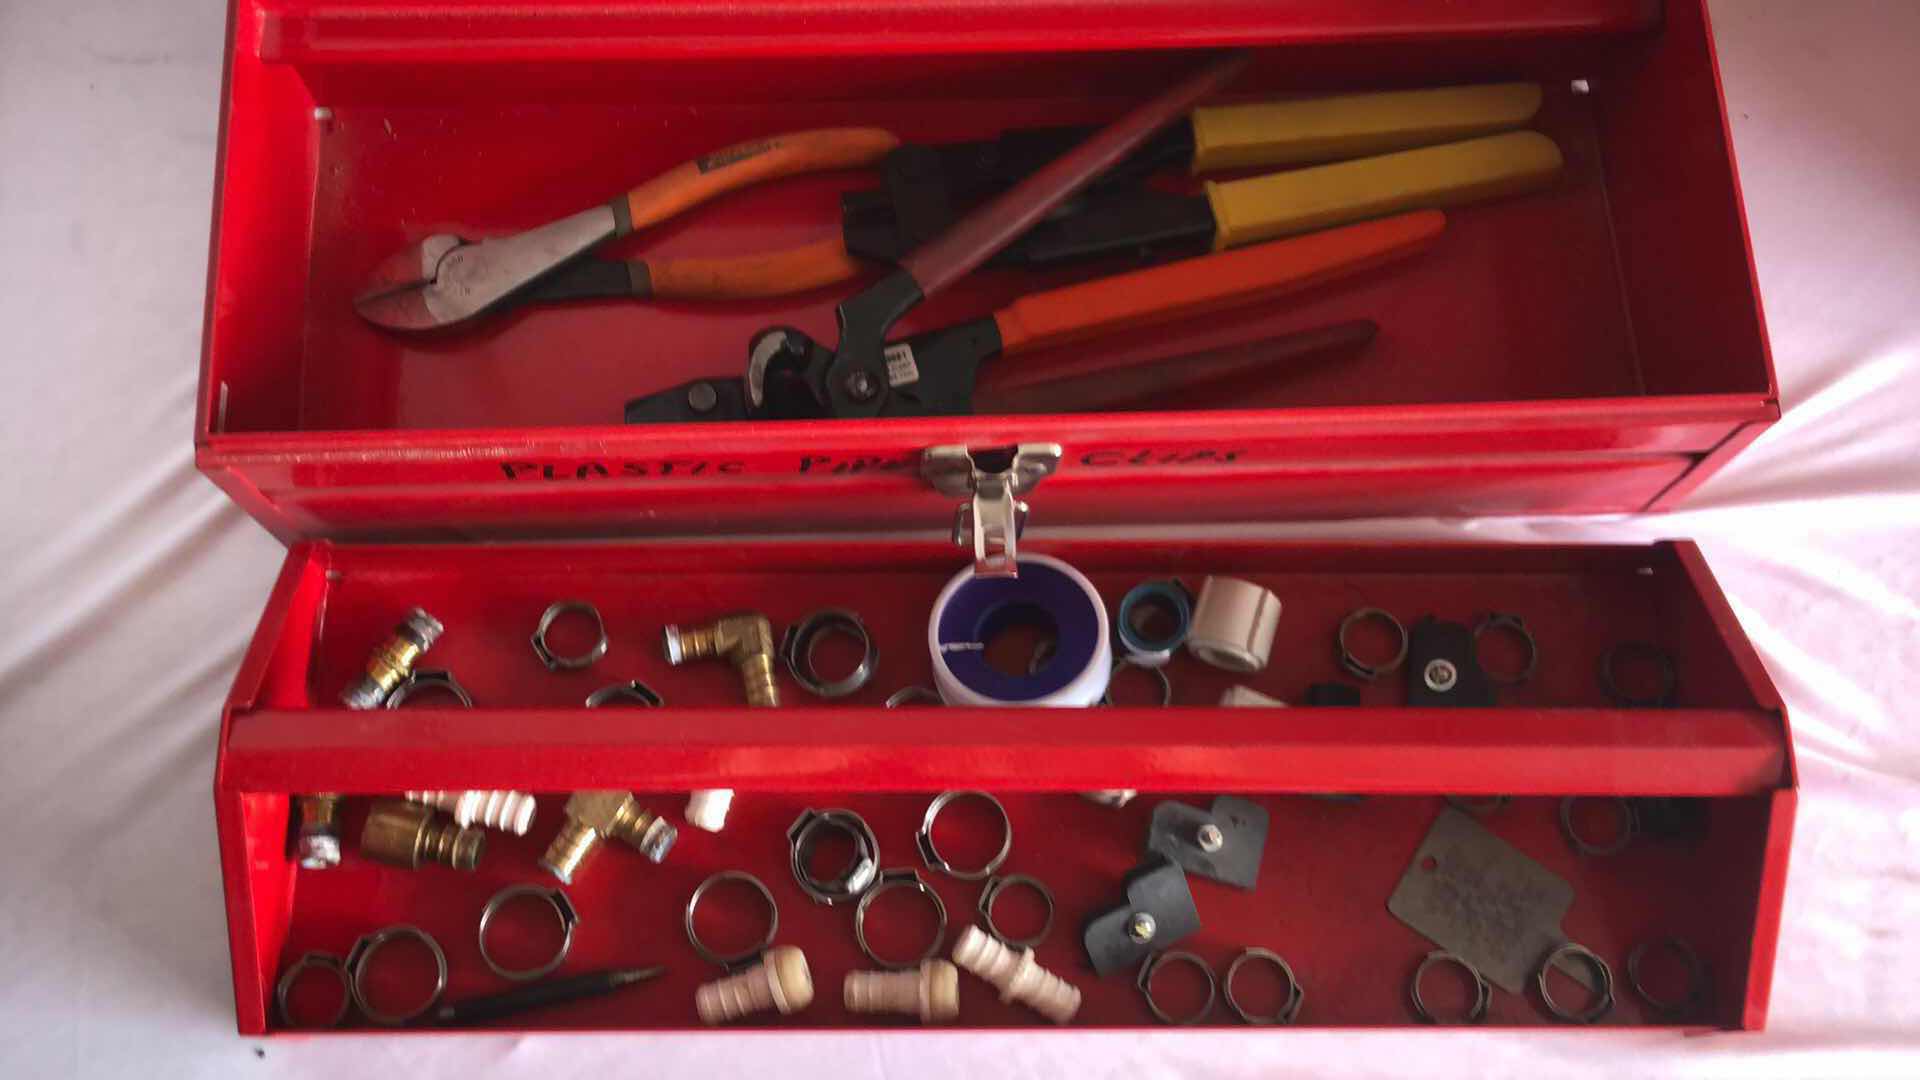 Photo 3 of VOYAGER 17” STEEL TOOLBOX W CRIMPING TOOLS AND STOREHOUSE STORAGE BIN FULL OF WALL ANCHORS